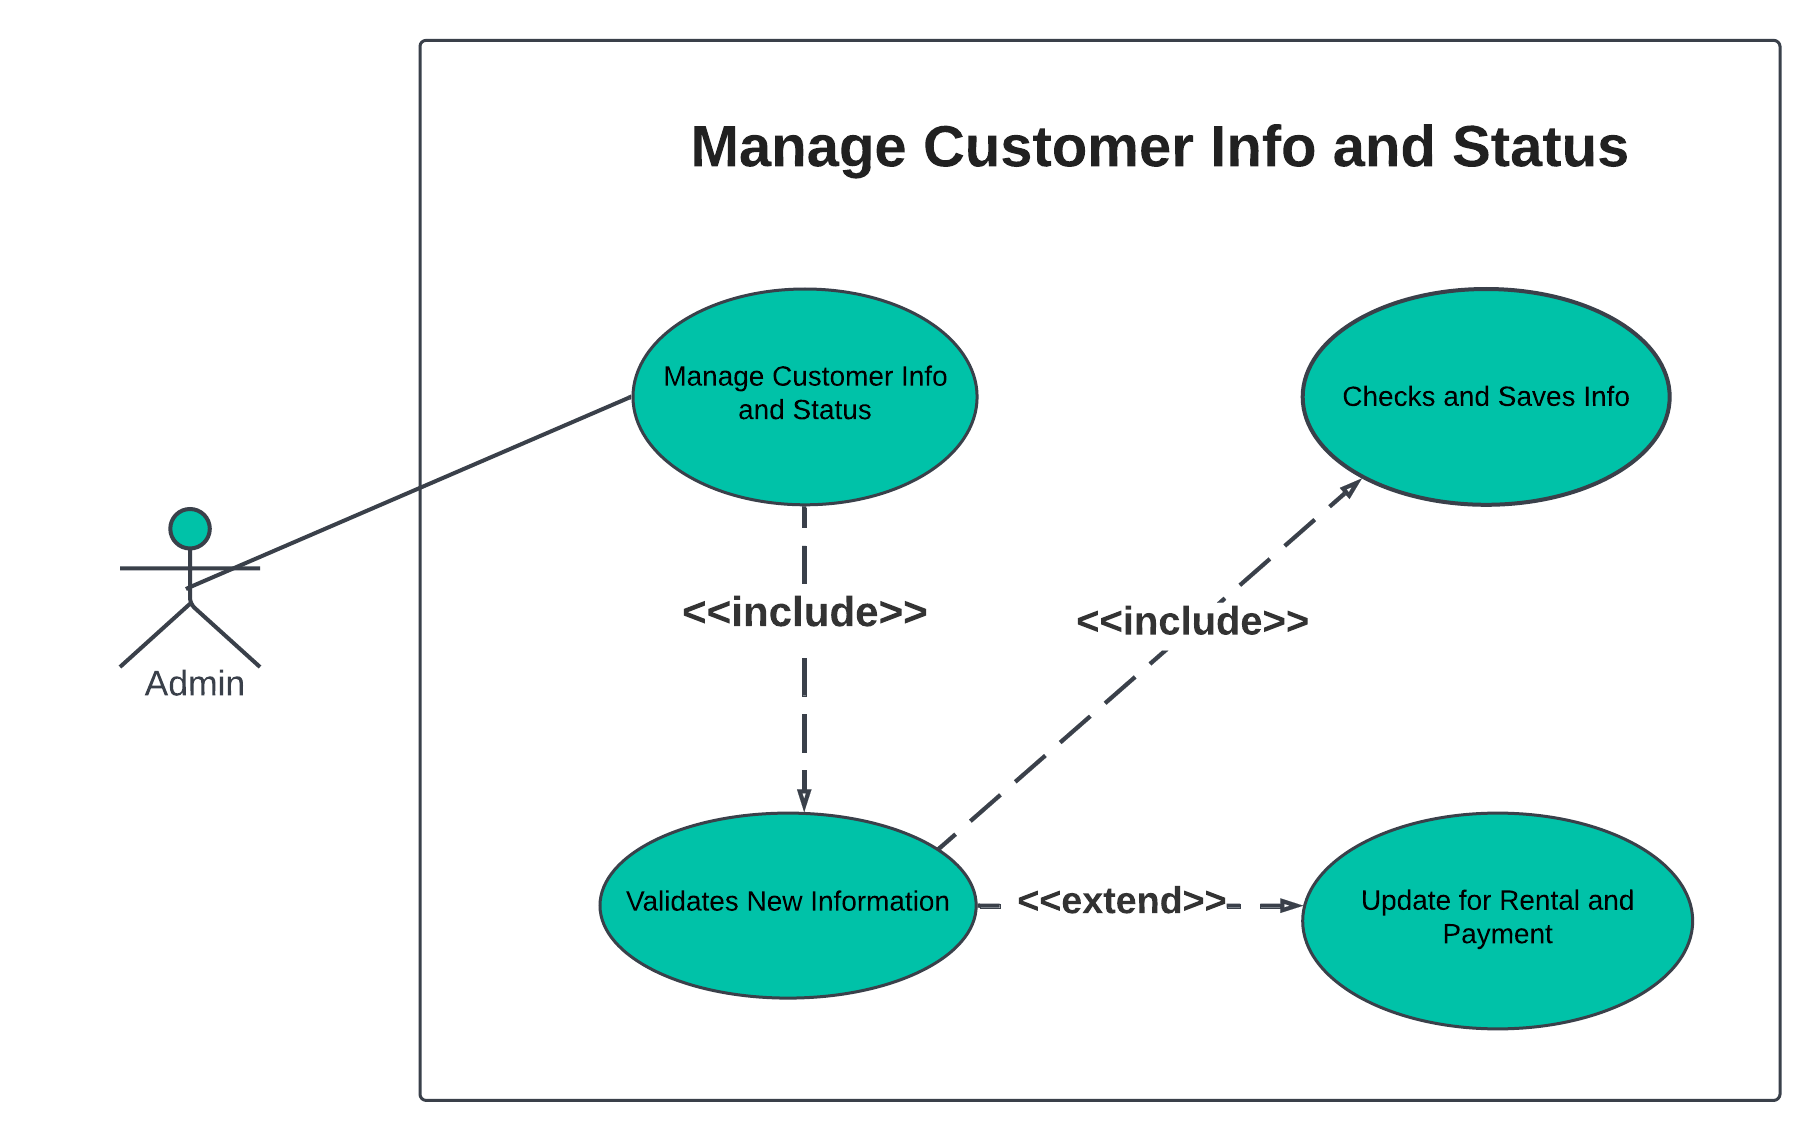 MANAGE CUSTOMER INFO AND STATUS USE CASE DIAGRAM